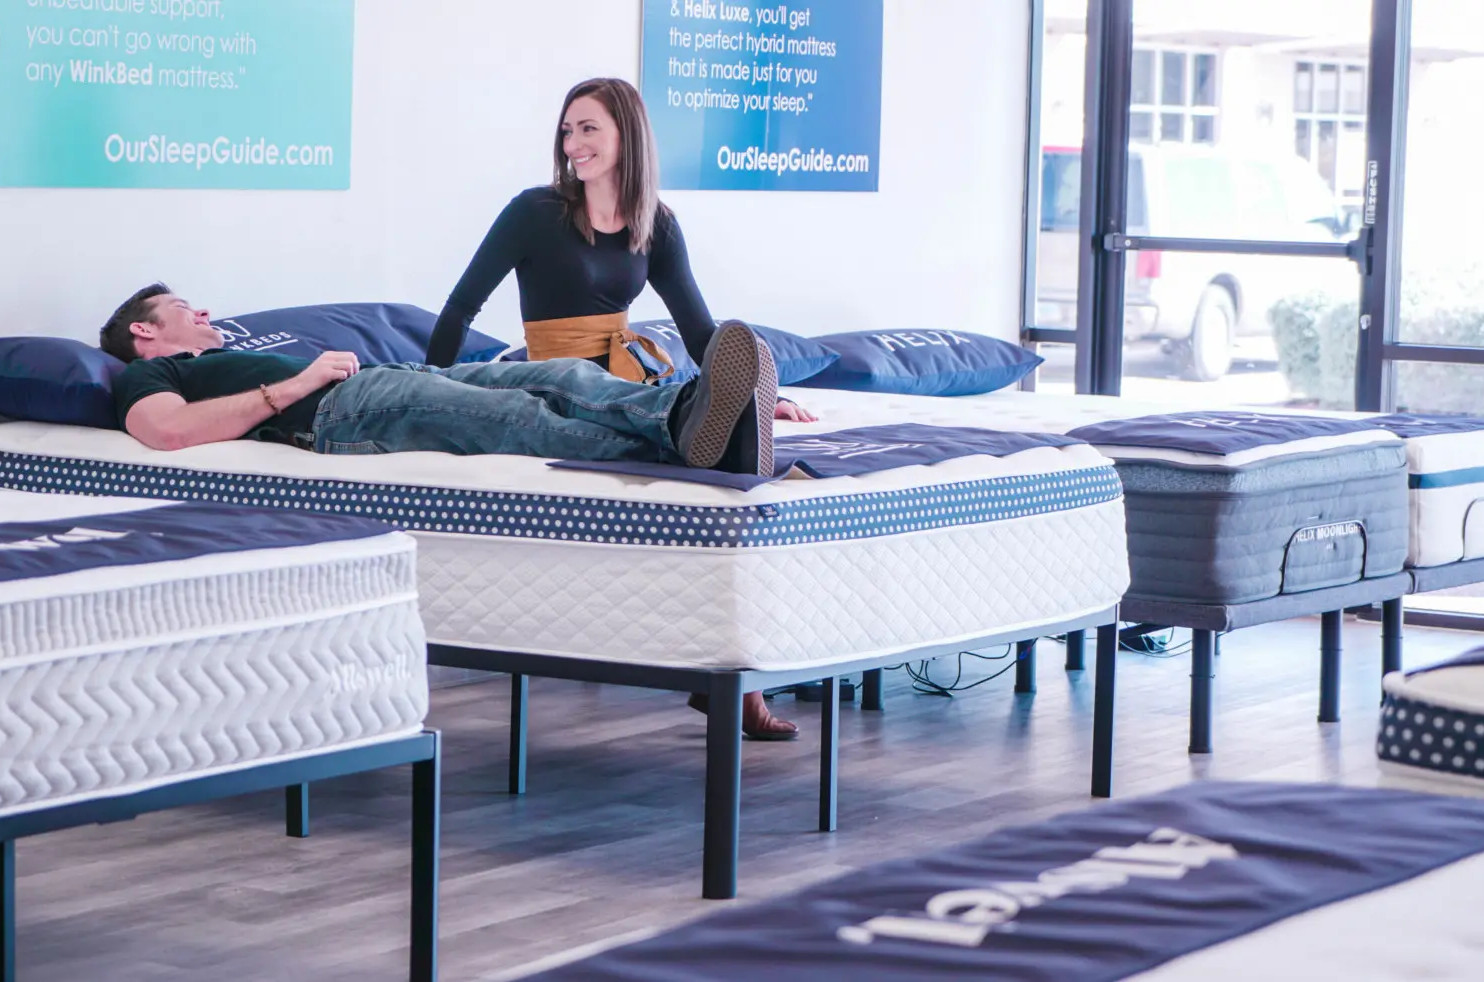 shopping for mattresses and furniture in person